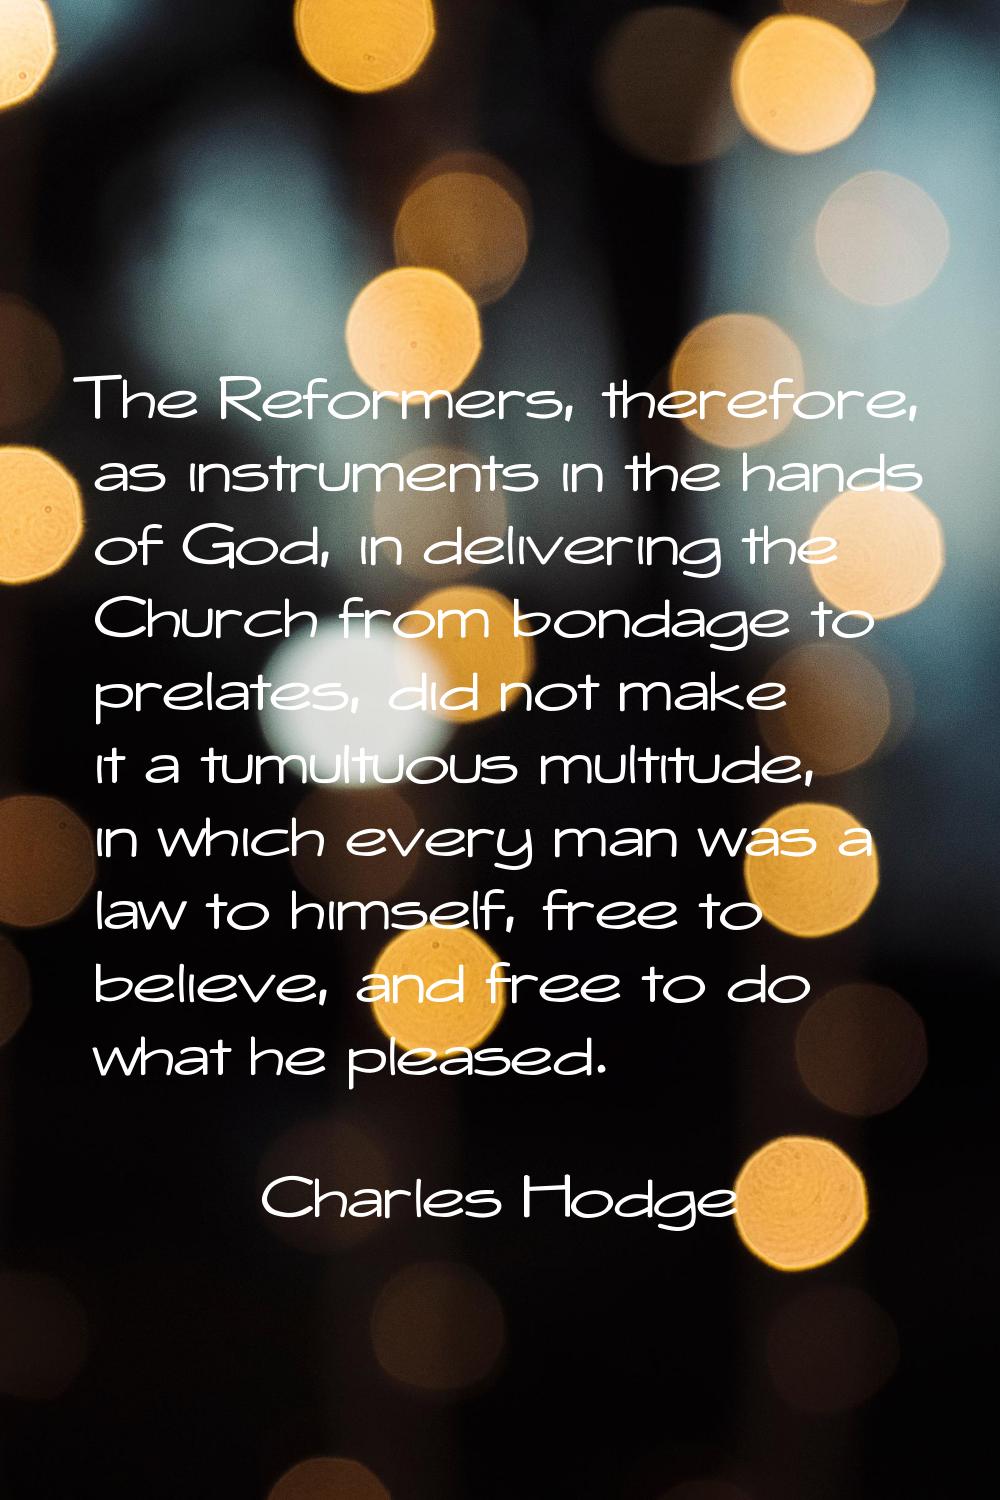 The Reformers, therefore, as instruments in the hands of God, in delivering the Church from bondage